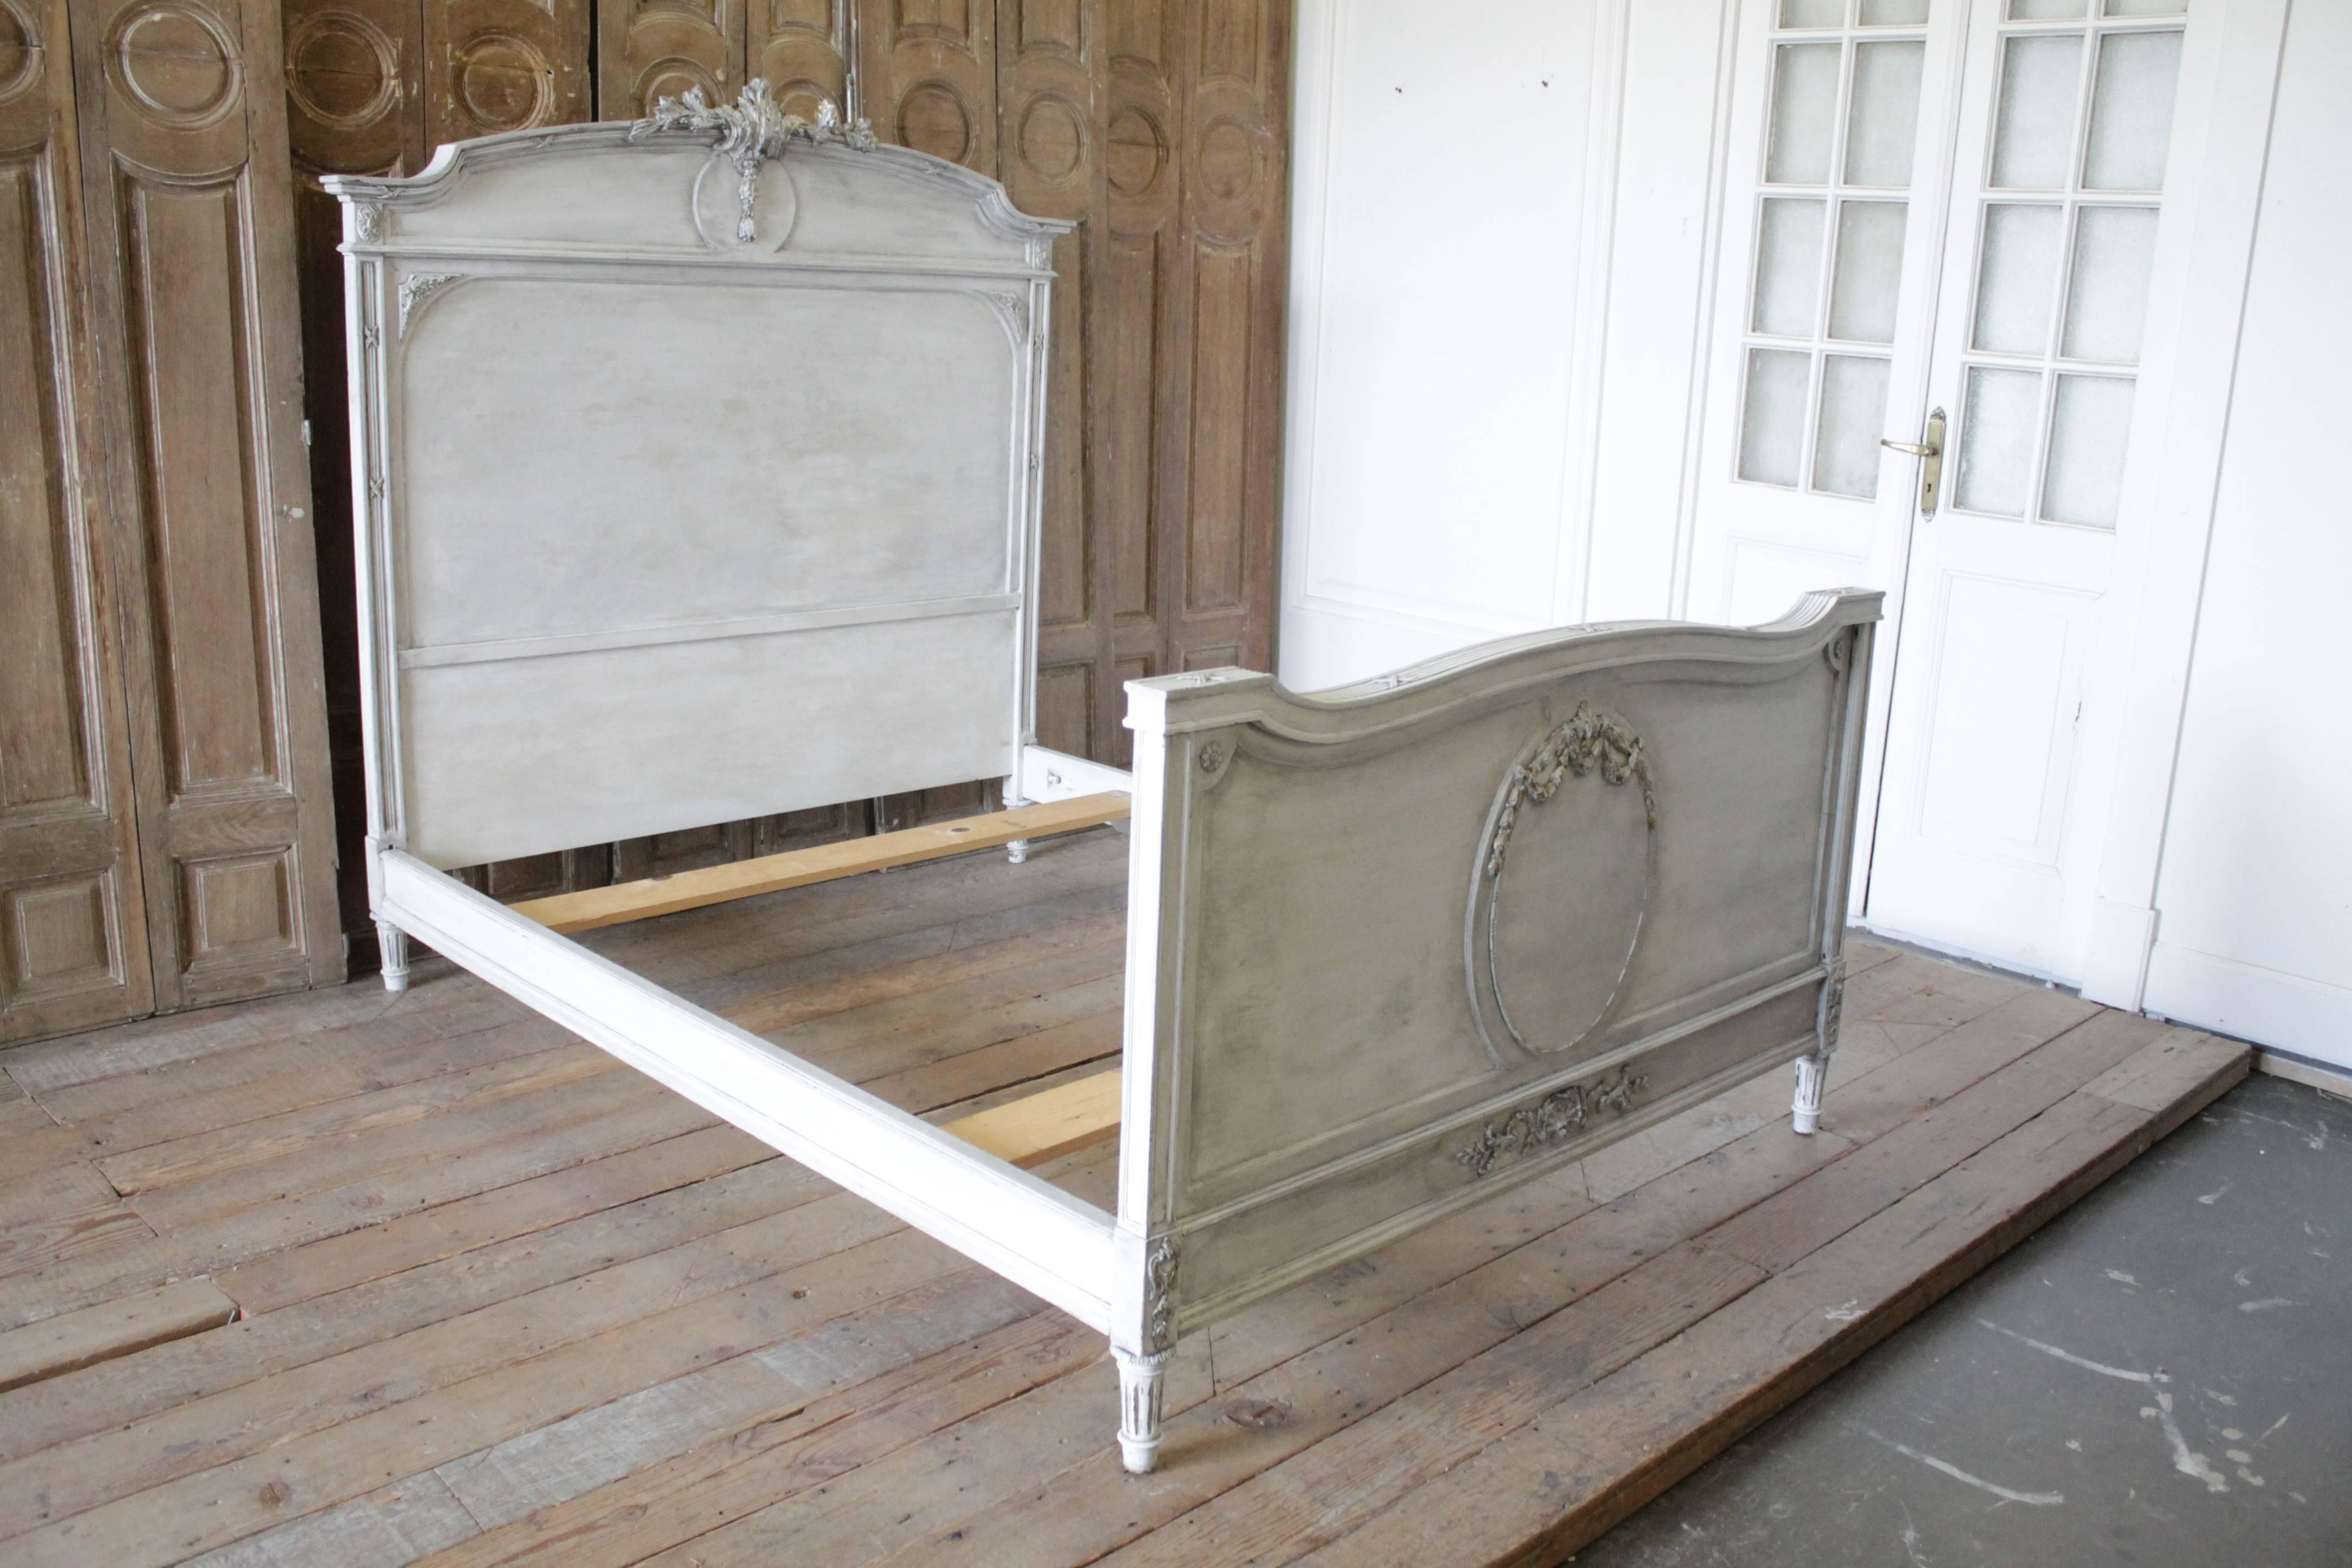 Beautiful French Louis XVI style bed painted in a soft off white, with subtle distressed edges, and hand applied patina to give the look of original painted finish. This bed frame fits a full size mattress. Includes headboard, footboard, original